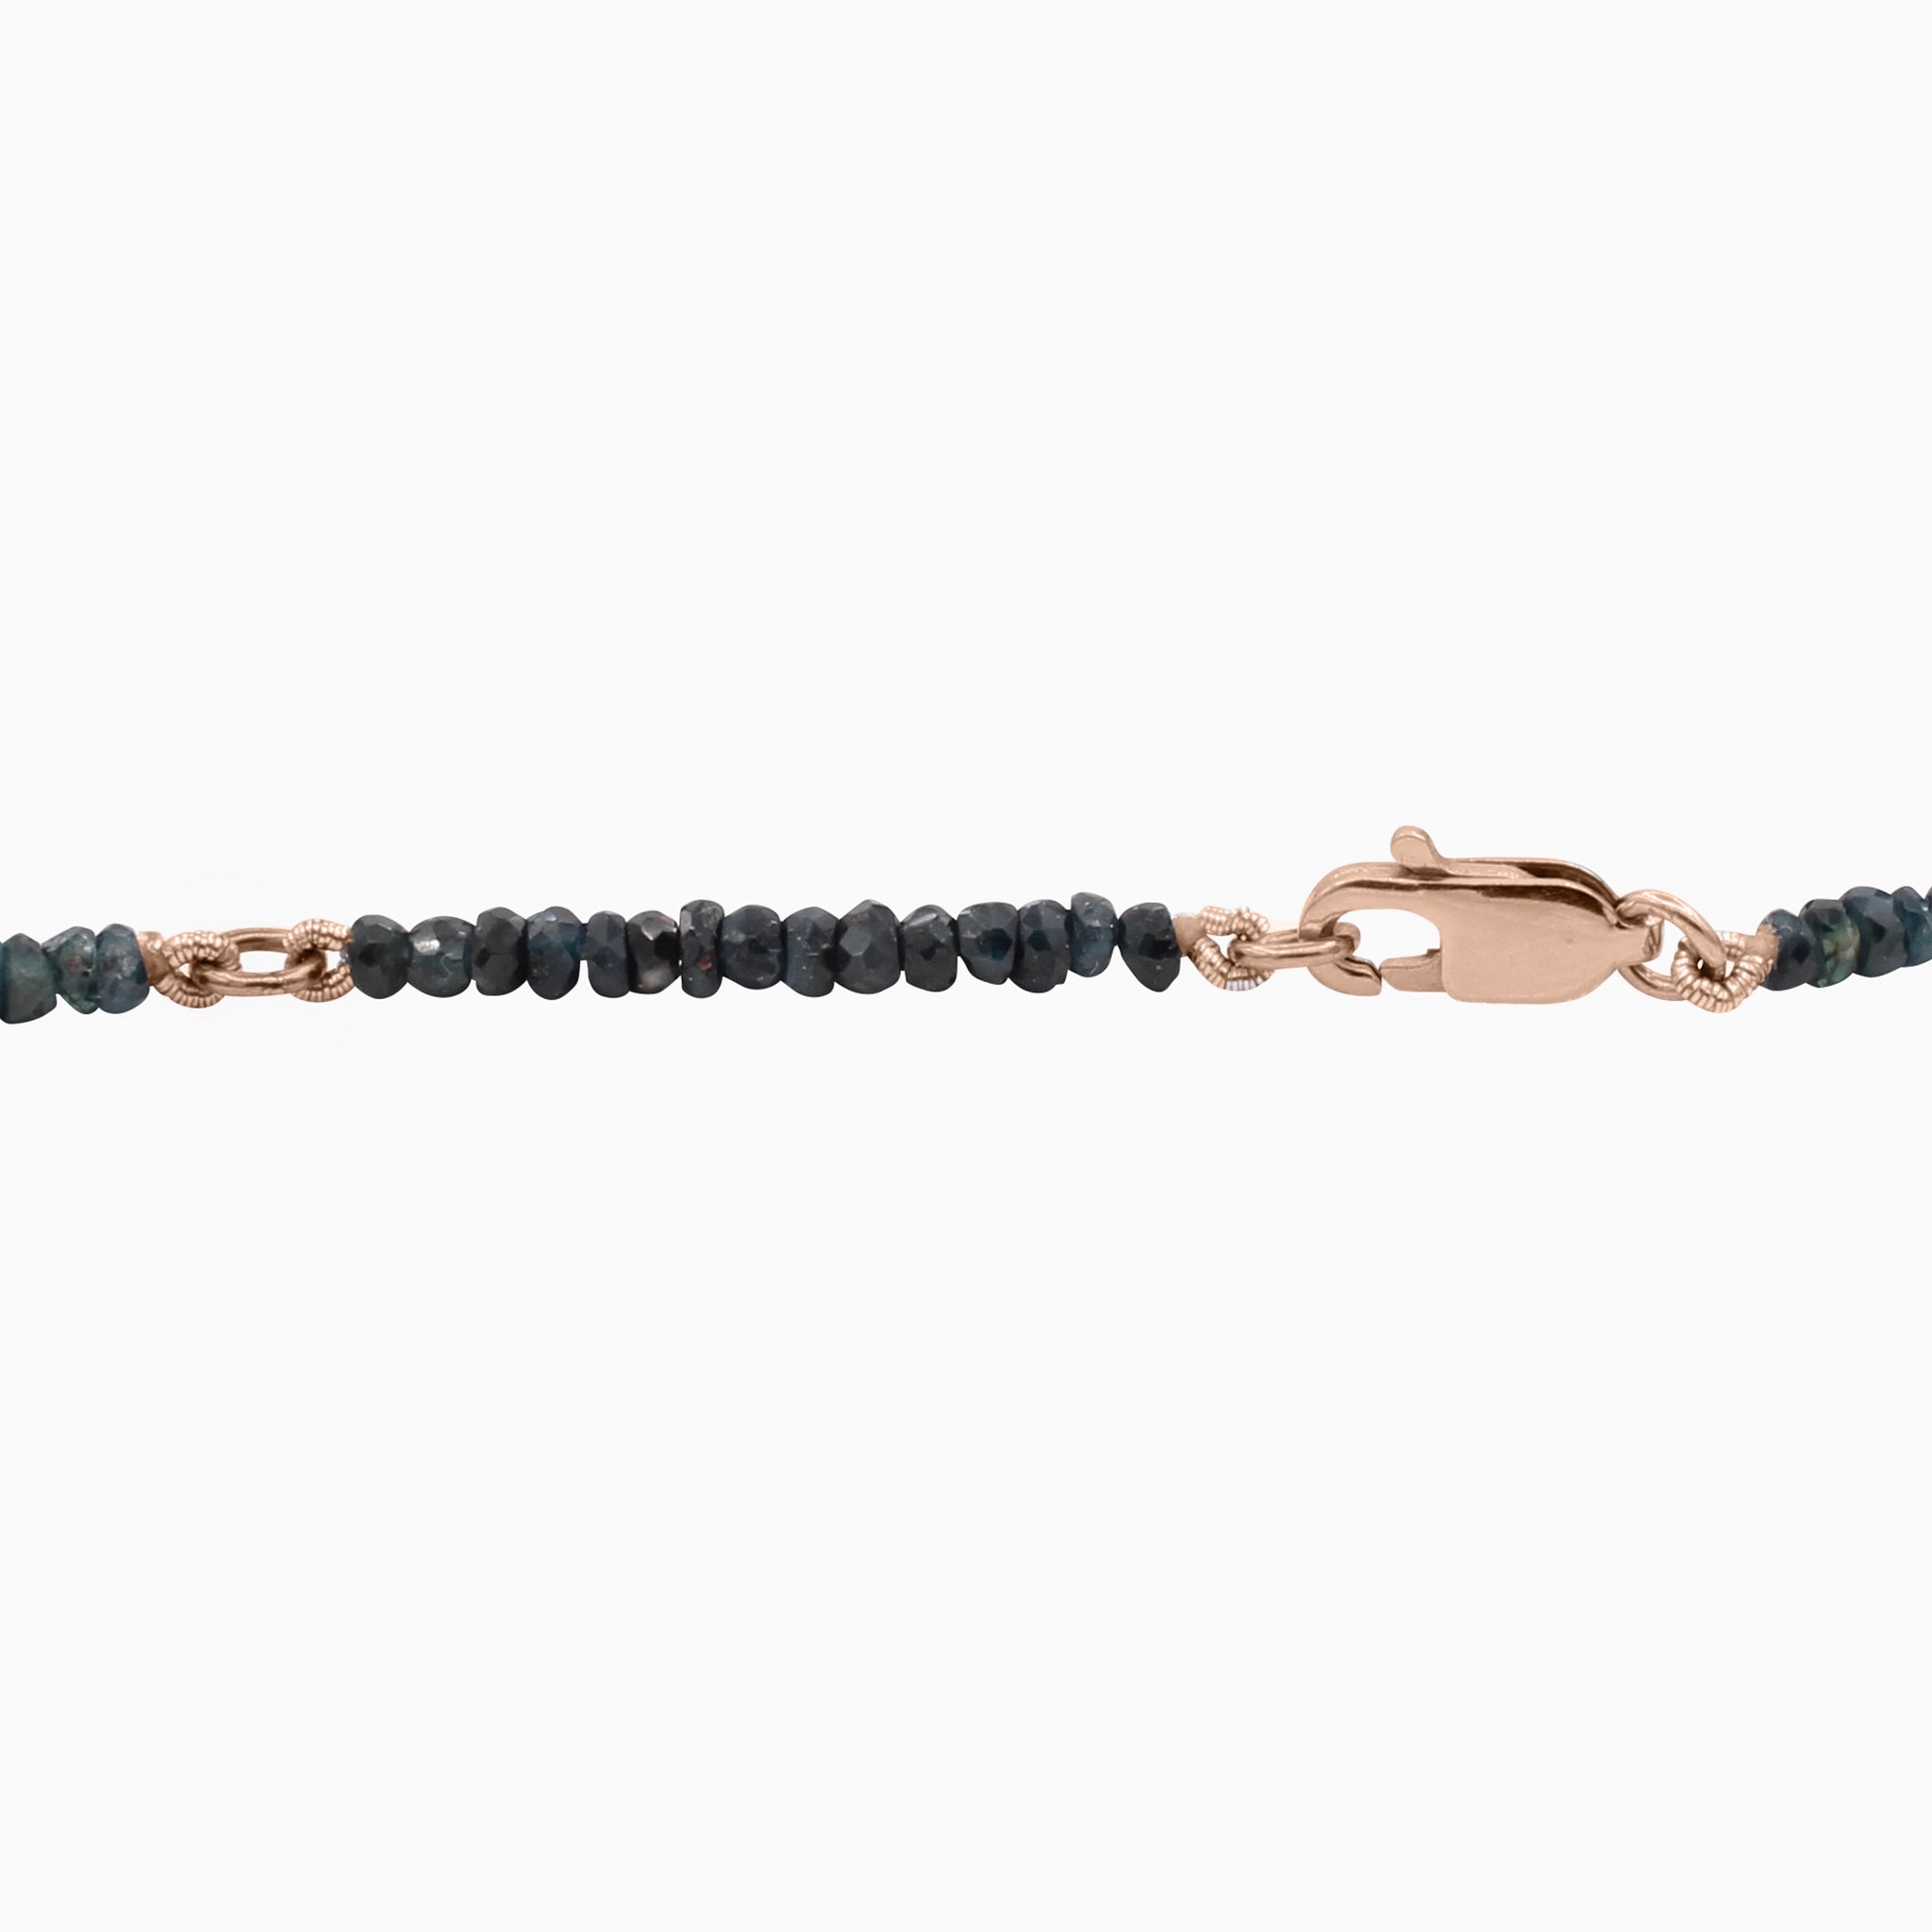 Blue 40CT Adjustable Ombre Sapphire Choker Necklace, 14k Rose Gold Lobster Clasp Closure